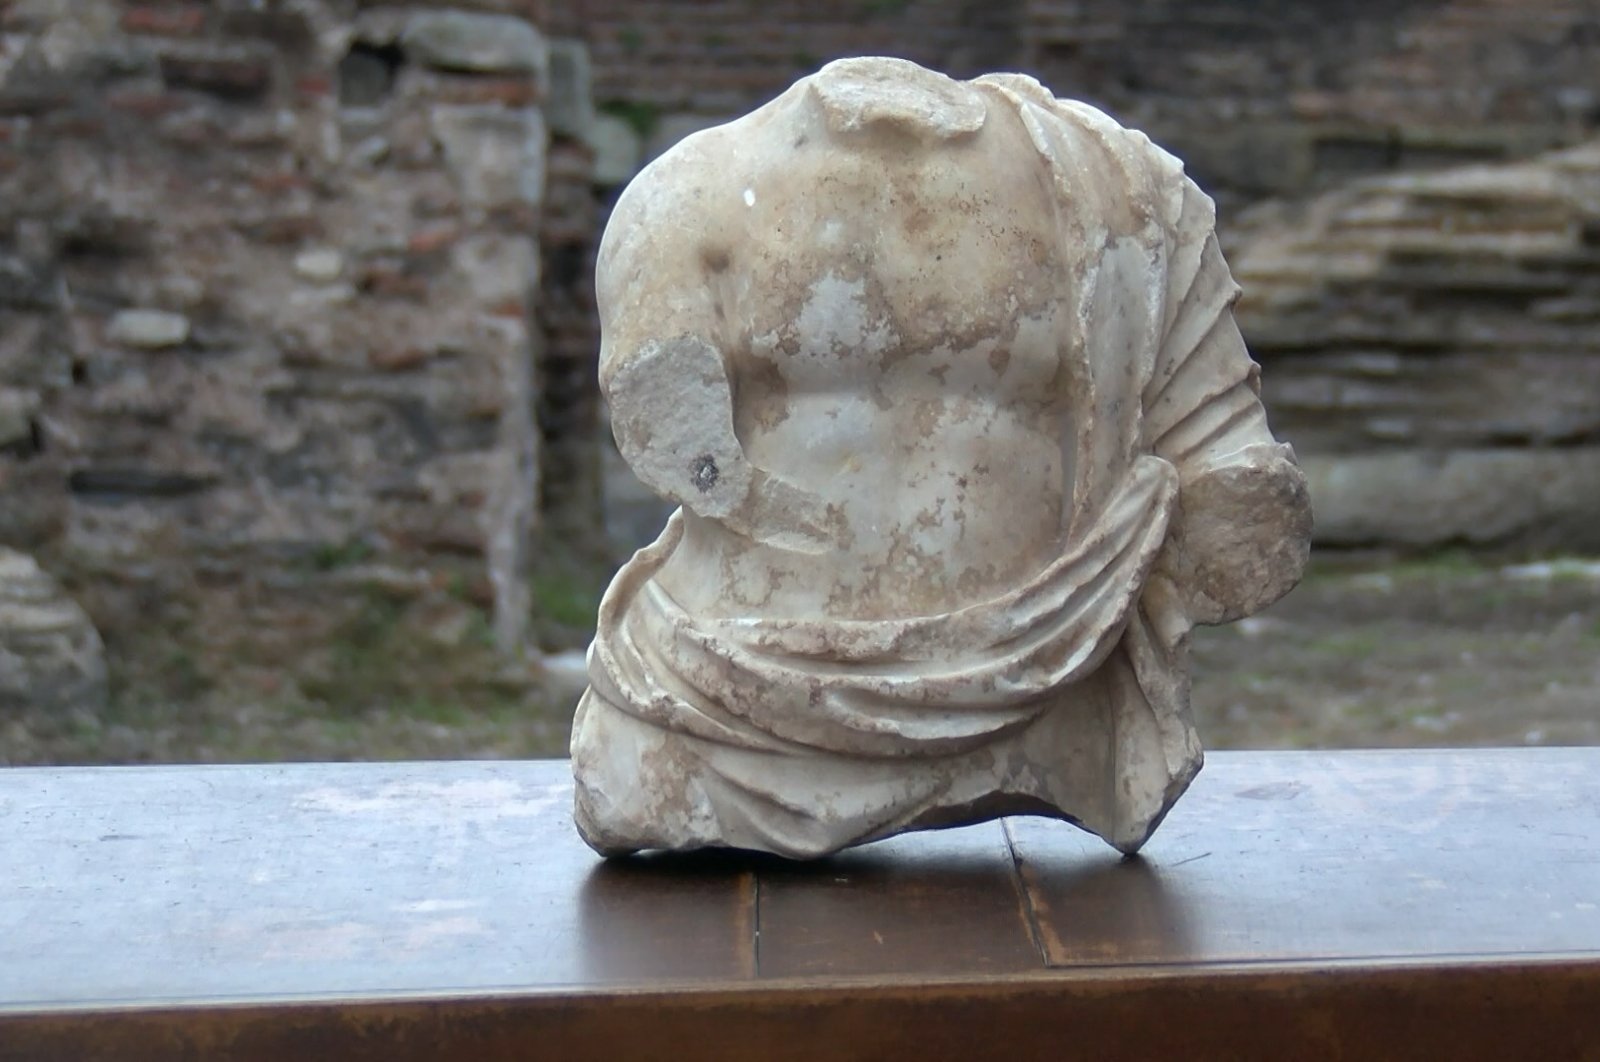 The statue thought to belong to the Roman period was discovered in Istanbul, Türkiye, April 3, 2023. (DHA Photo)